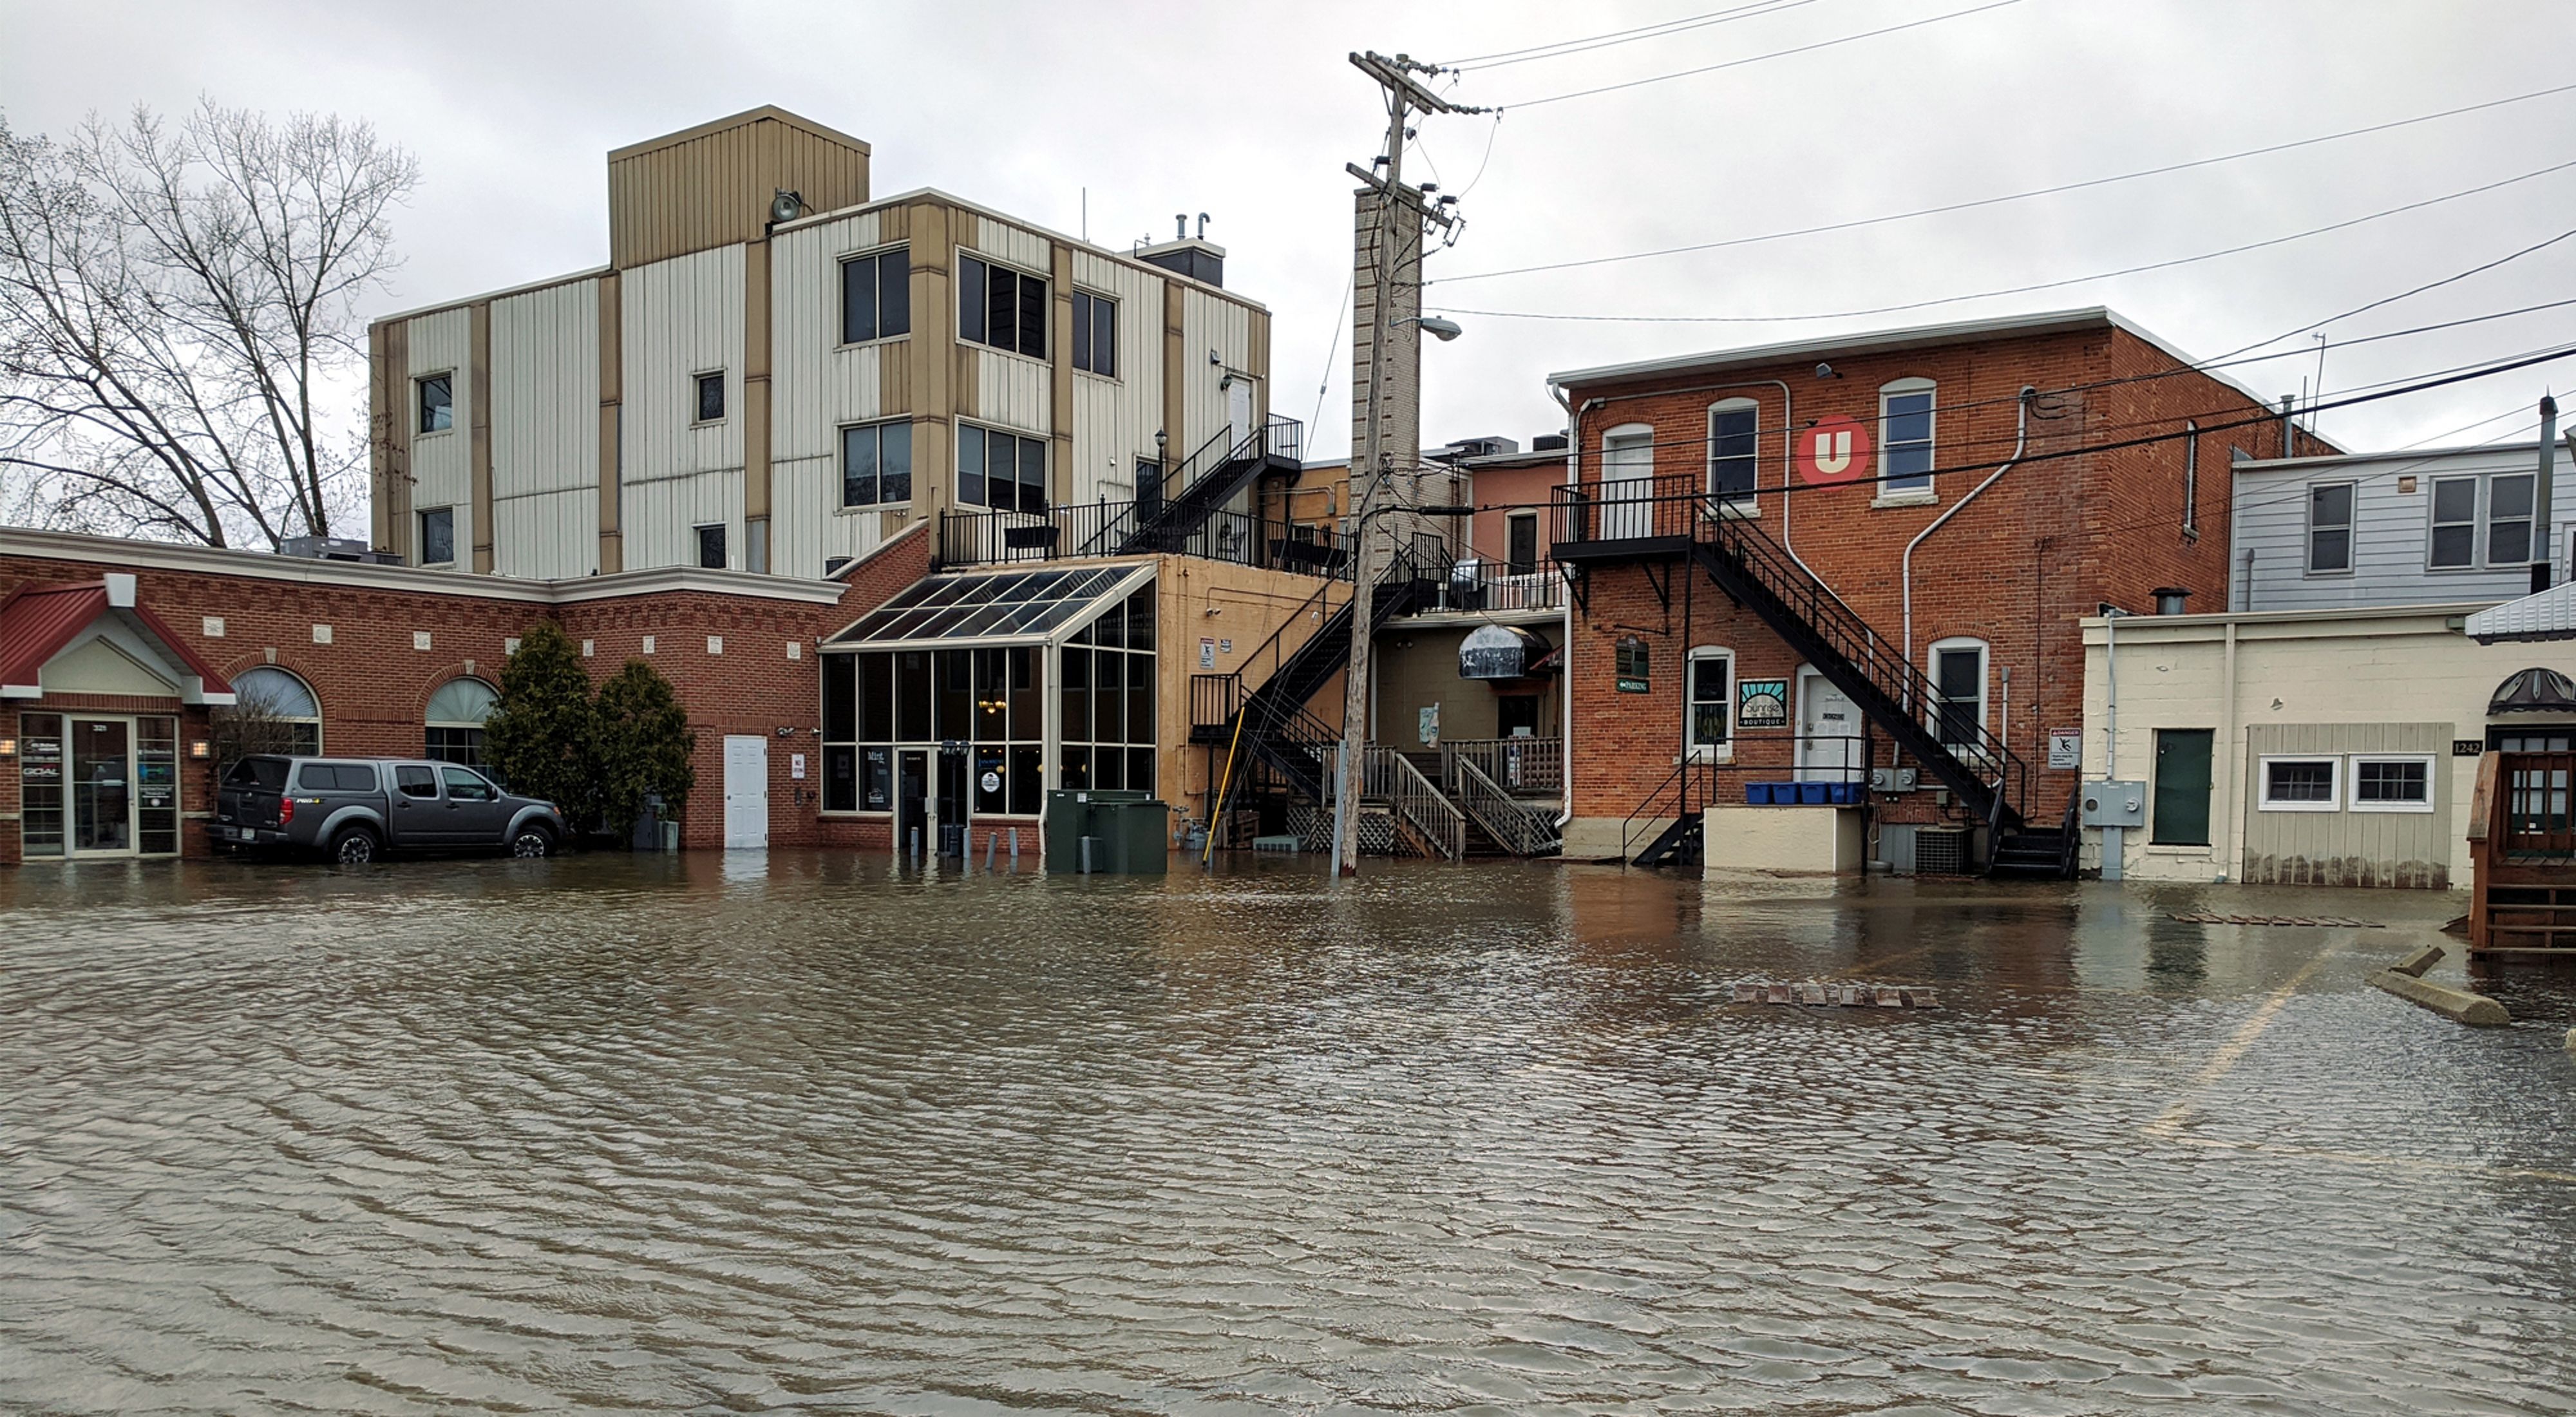 Several buildings in Green Bay, Wisconsin with floodwaters coming up to the entrances.